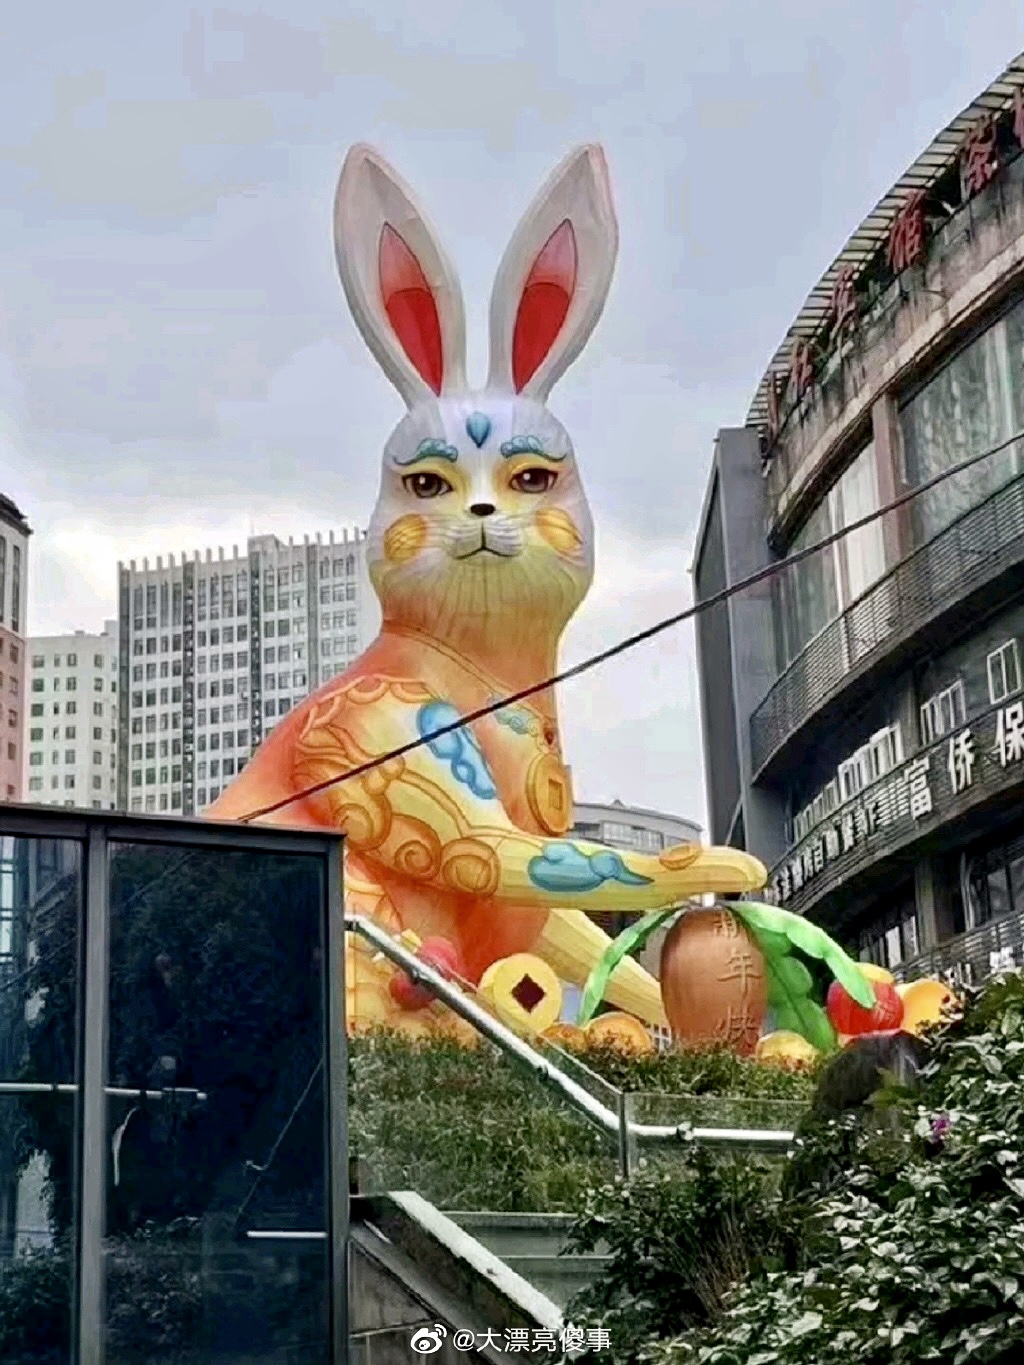 Lunar new year rabbit lantern with chinese elements on sking is demolished in Chongqinq, China. 